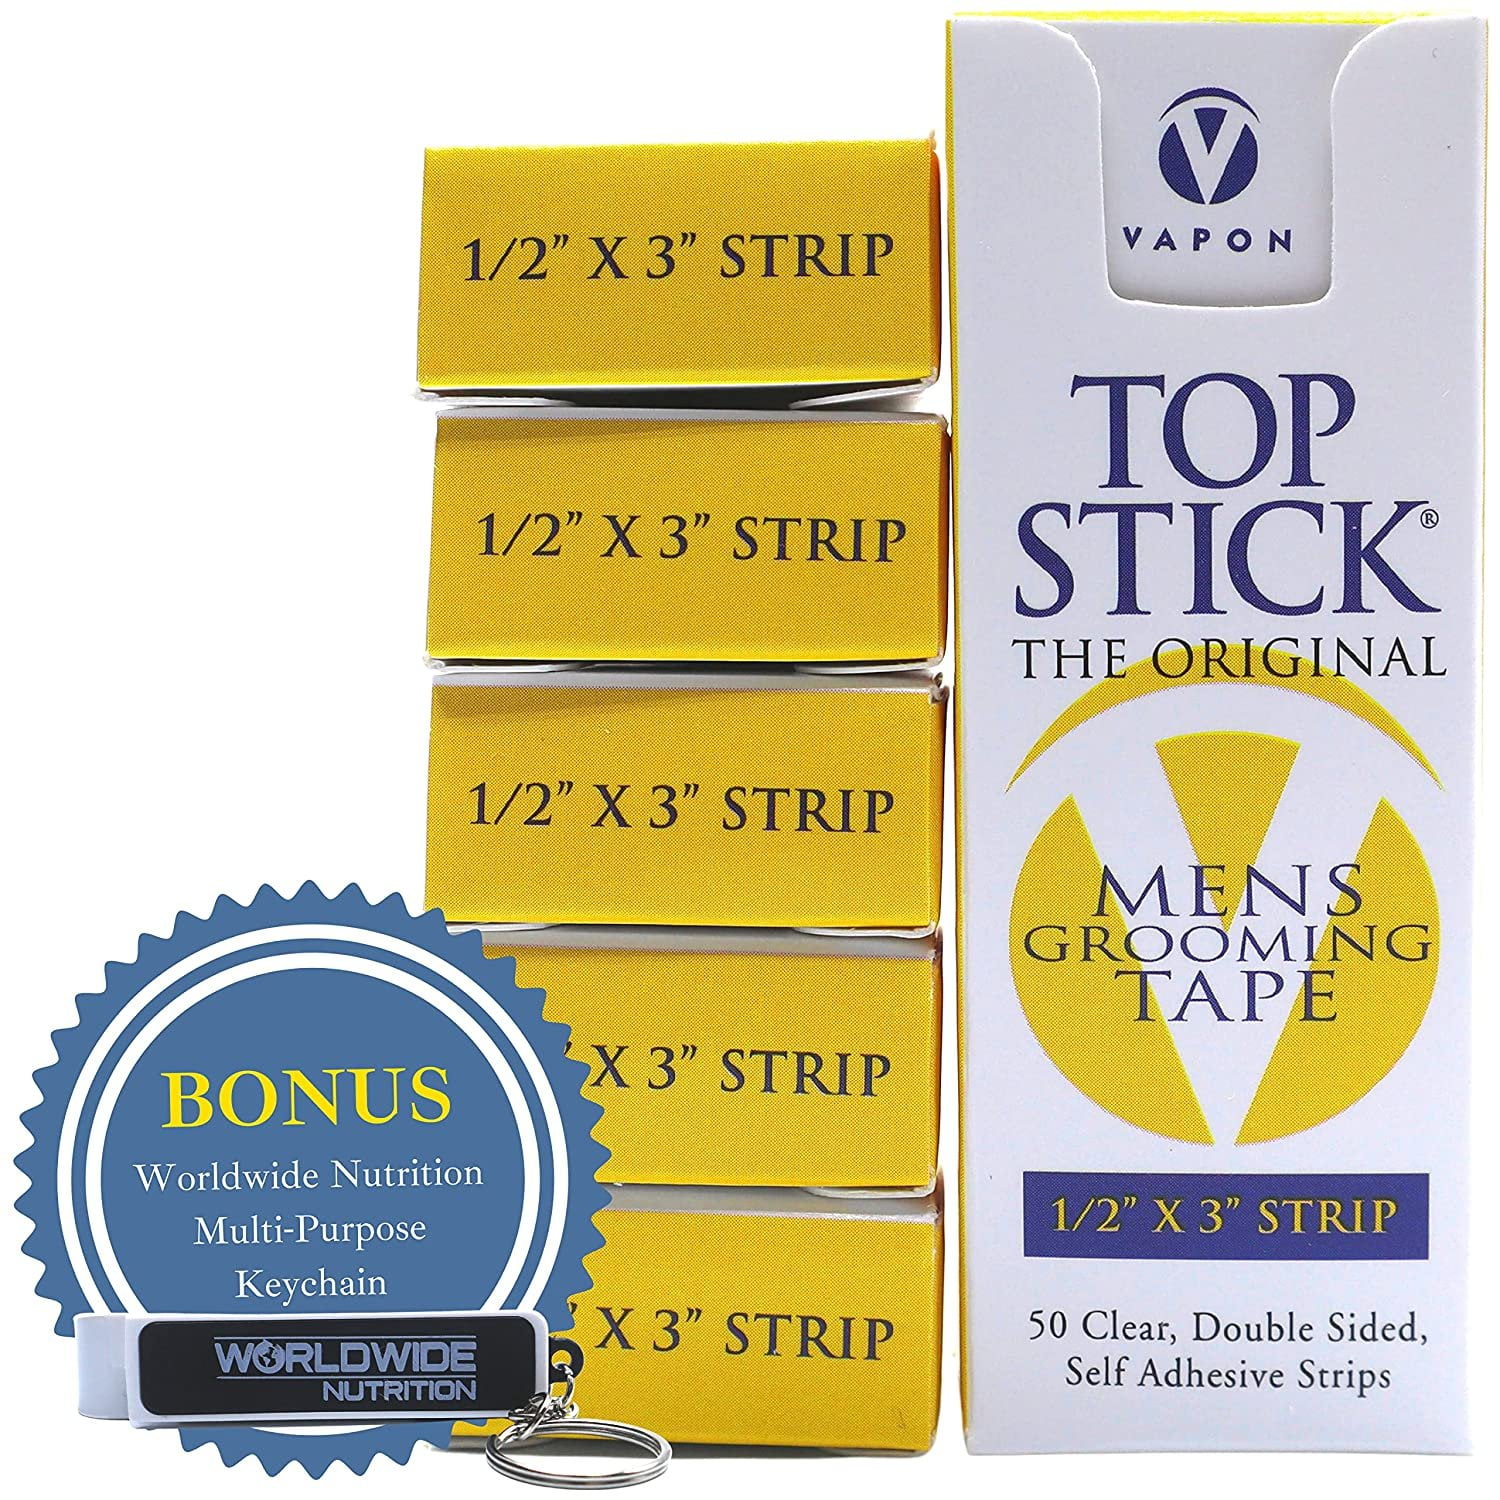 topstick clear hairpiece tape (1 roll)